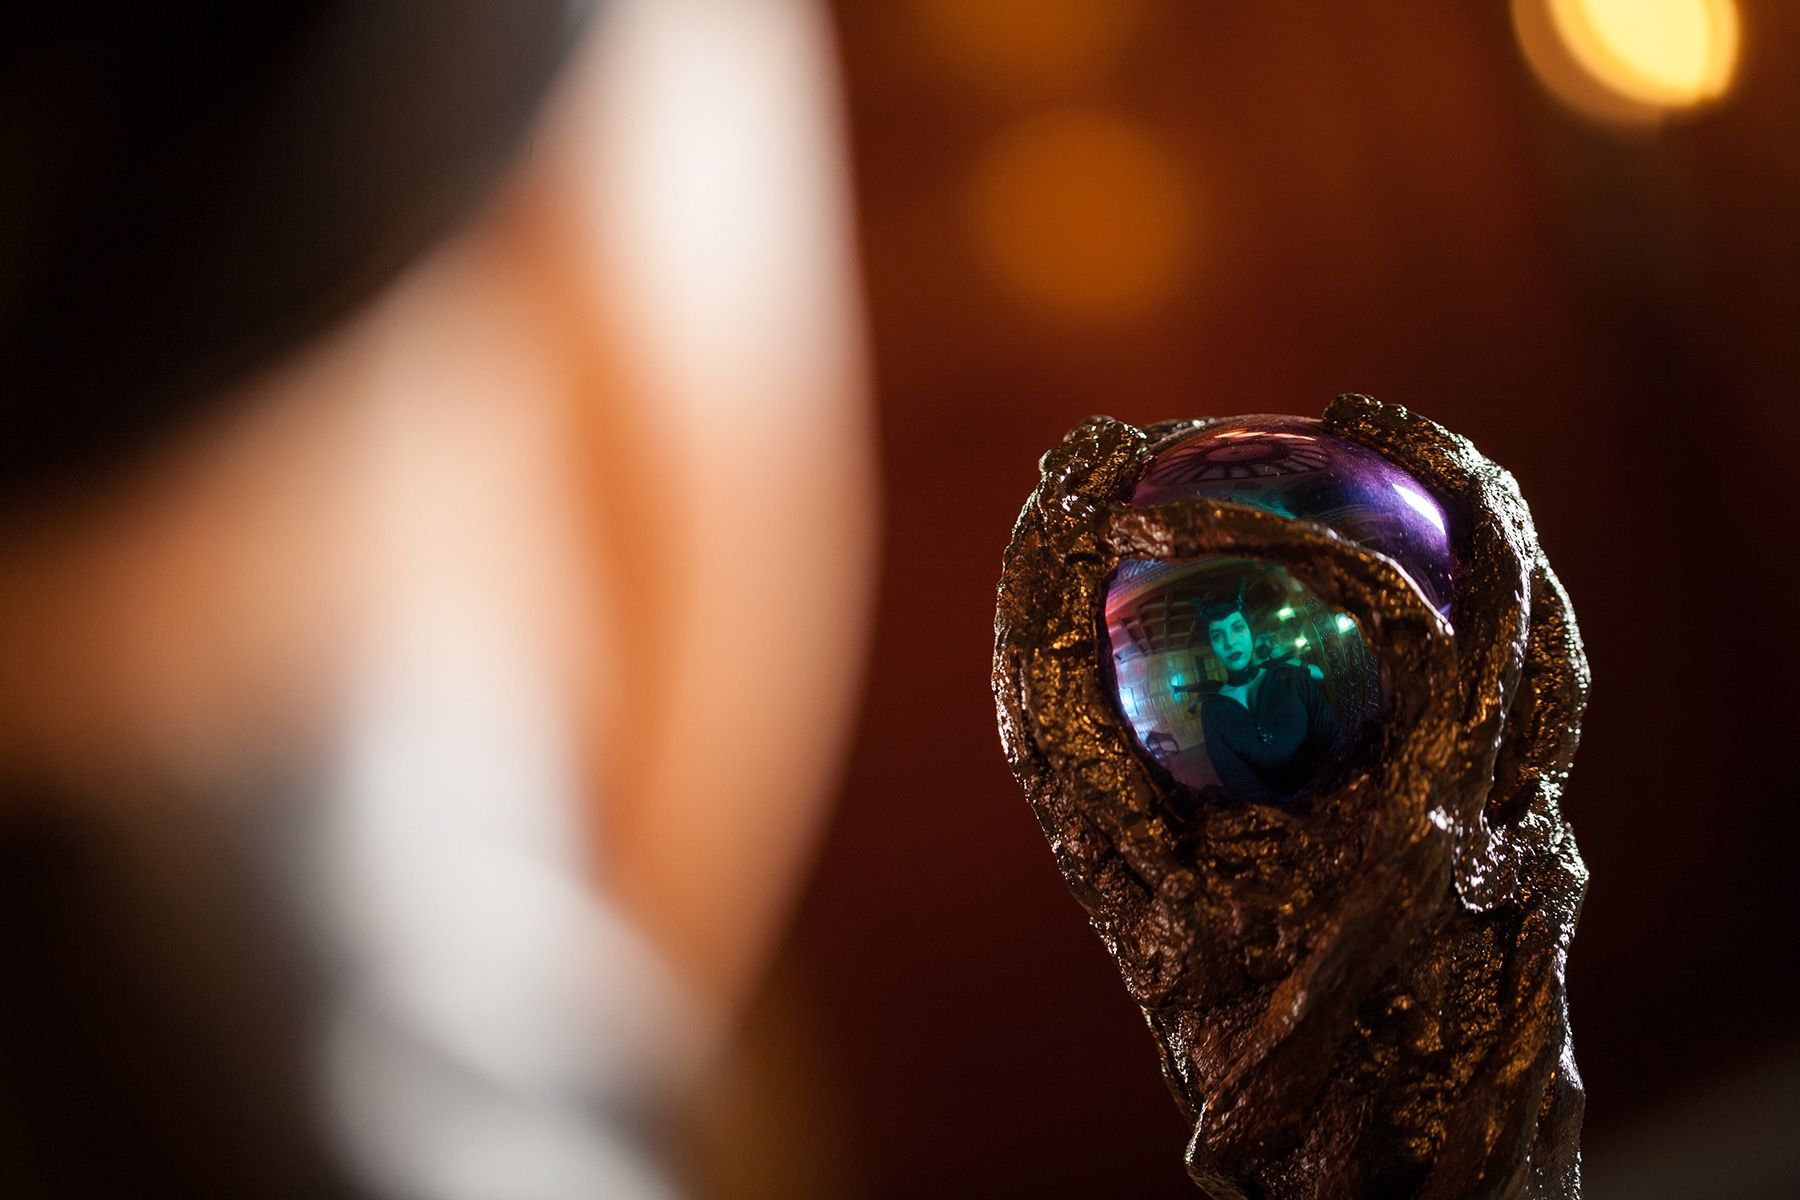 A photo taken over the shoulder of a Maleficent cosplayer. She is looking at the top of her staff, and her reflection is visible in the gazing ball.